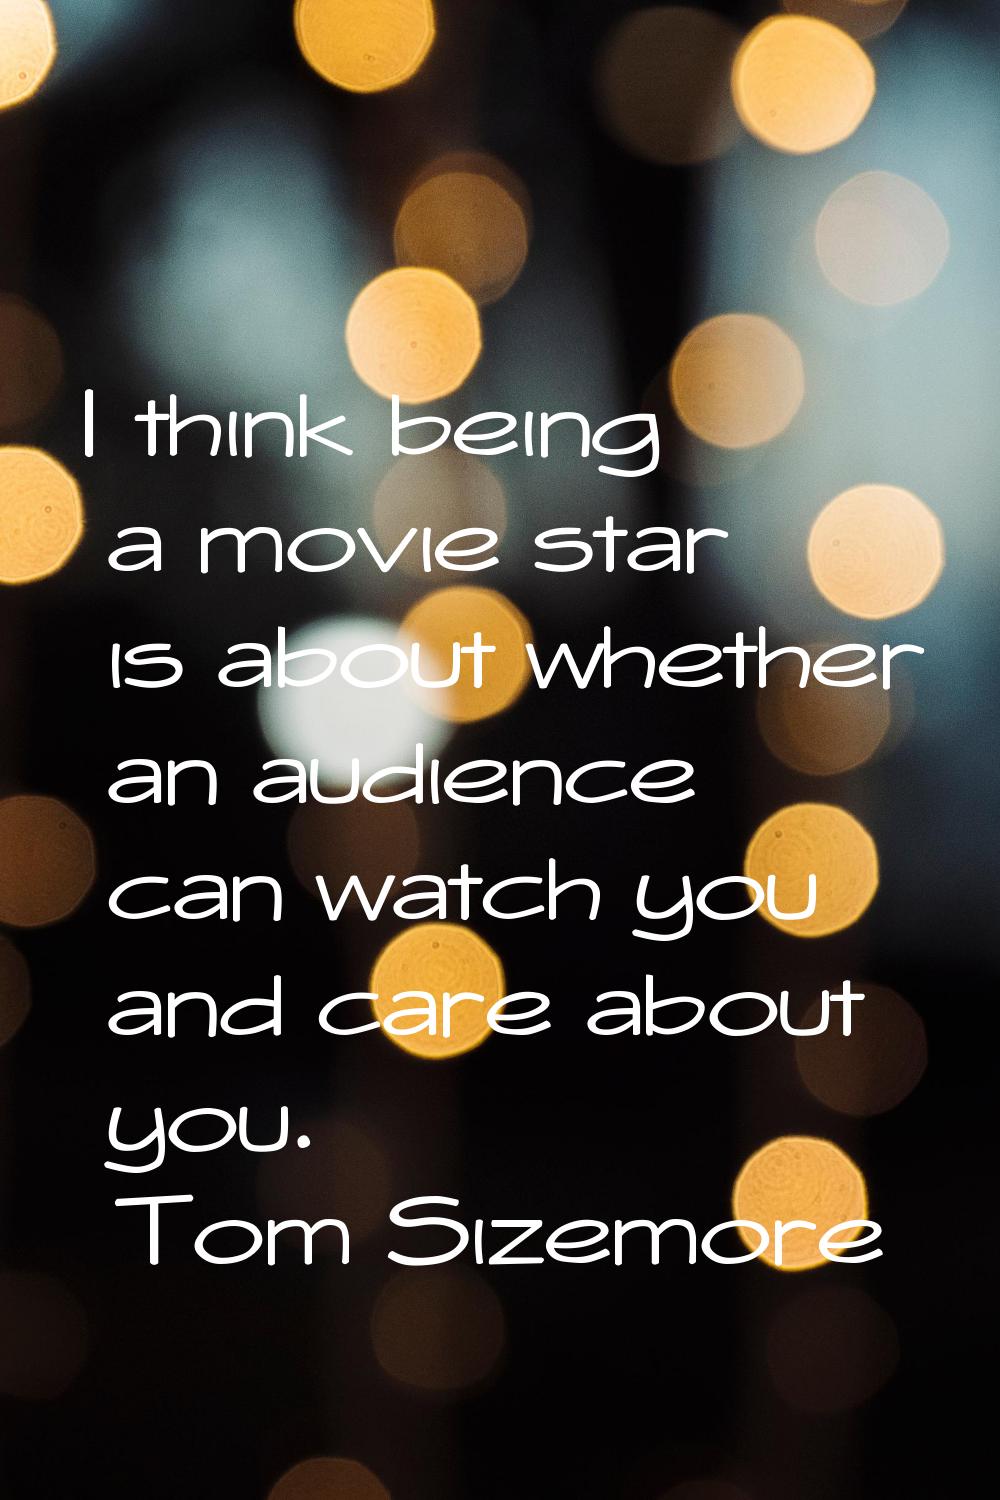 I think being a movie star is about whether an audience can watch you and care about you.